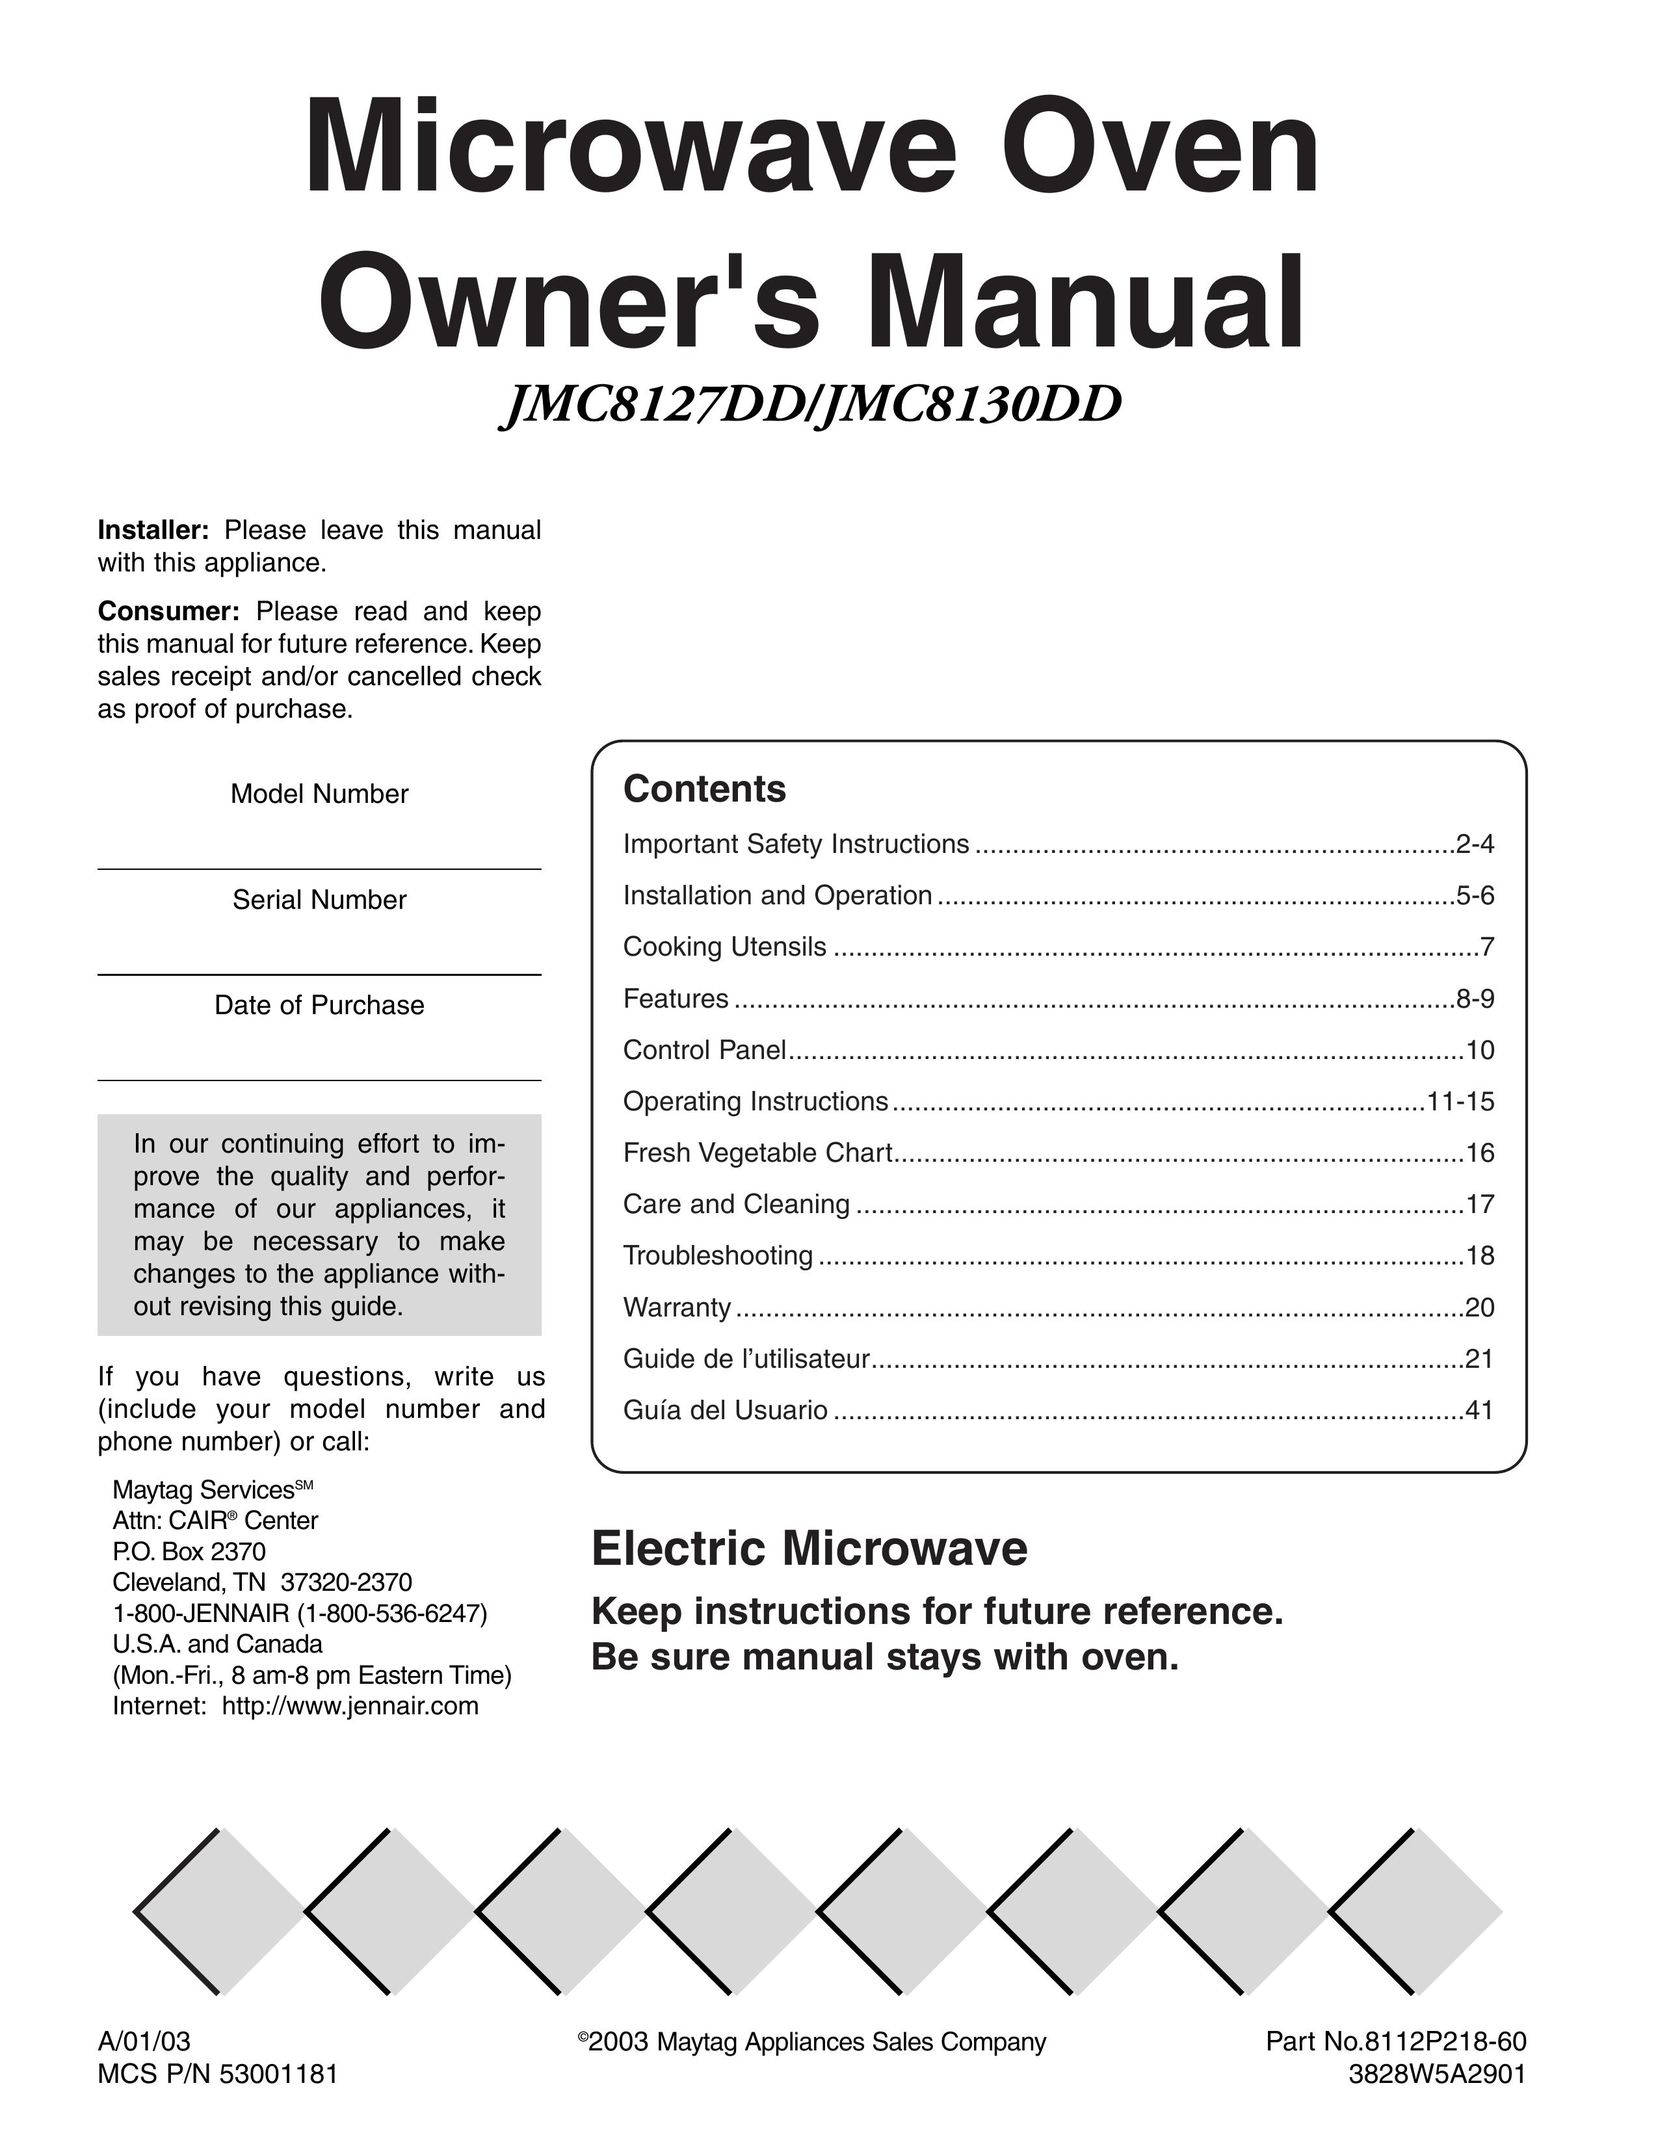 Maytag JMC8130DD Microwave Oven User Manual